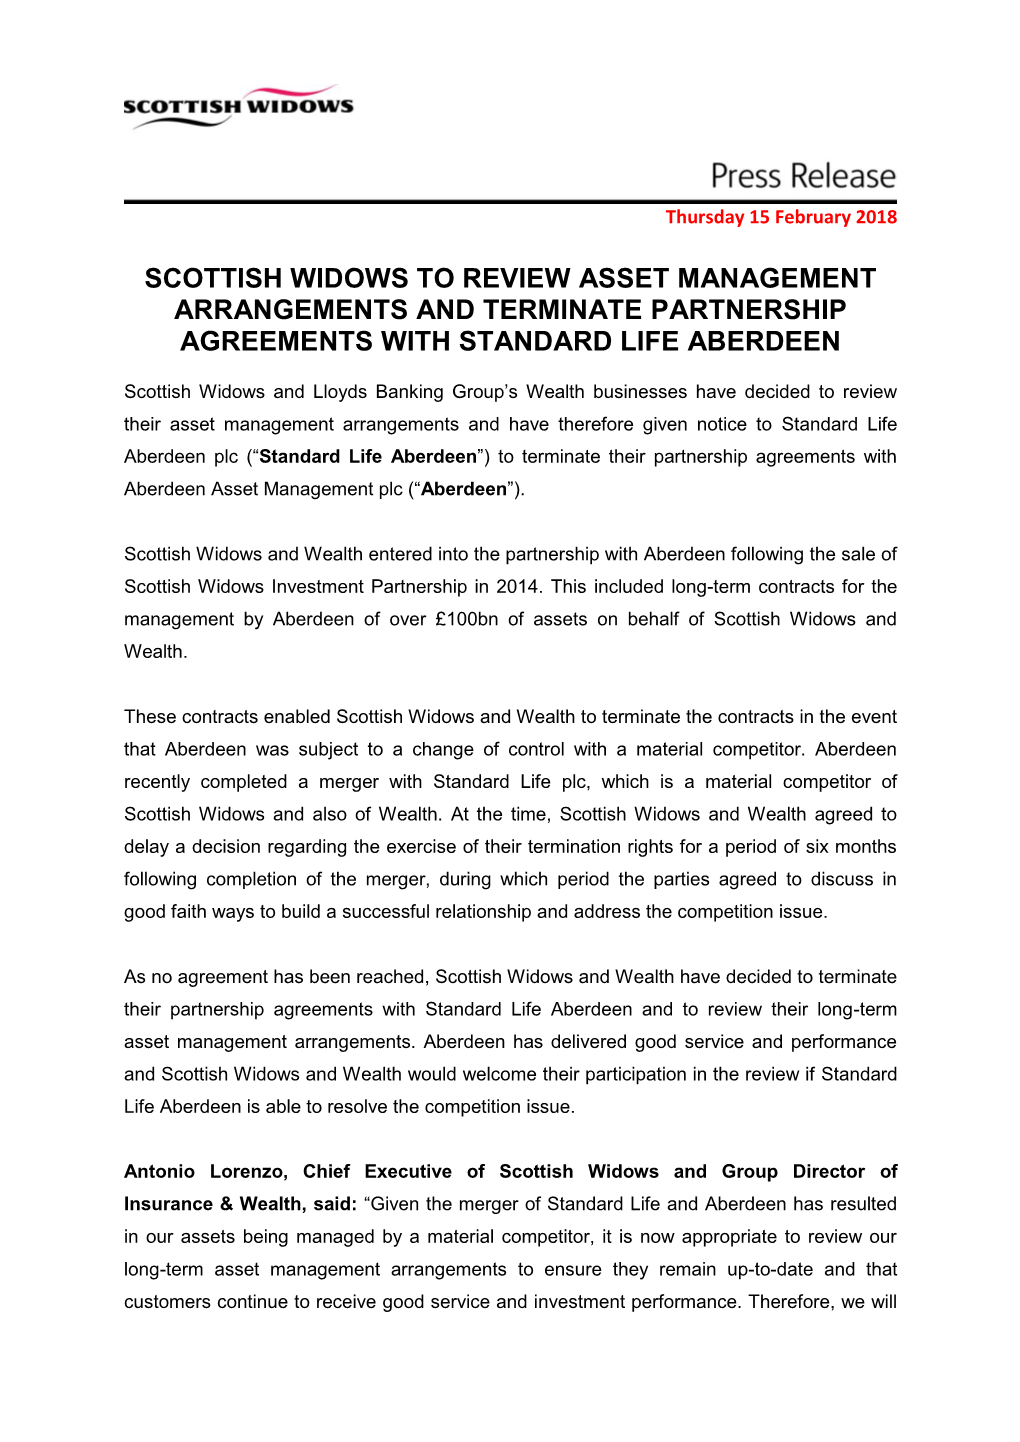 Scottish Widows to Review Asset Management Arrangements and Terminate Partnership Agreements with Standard Life Aberdeen